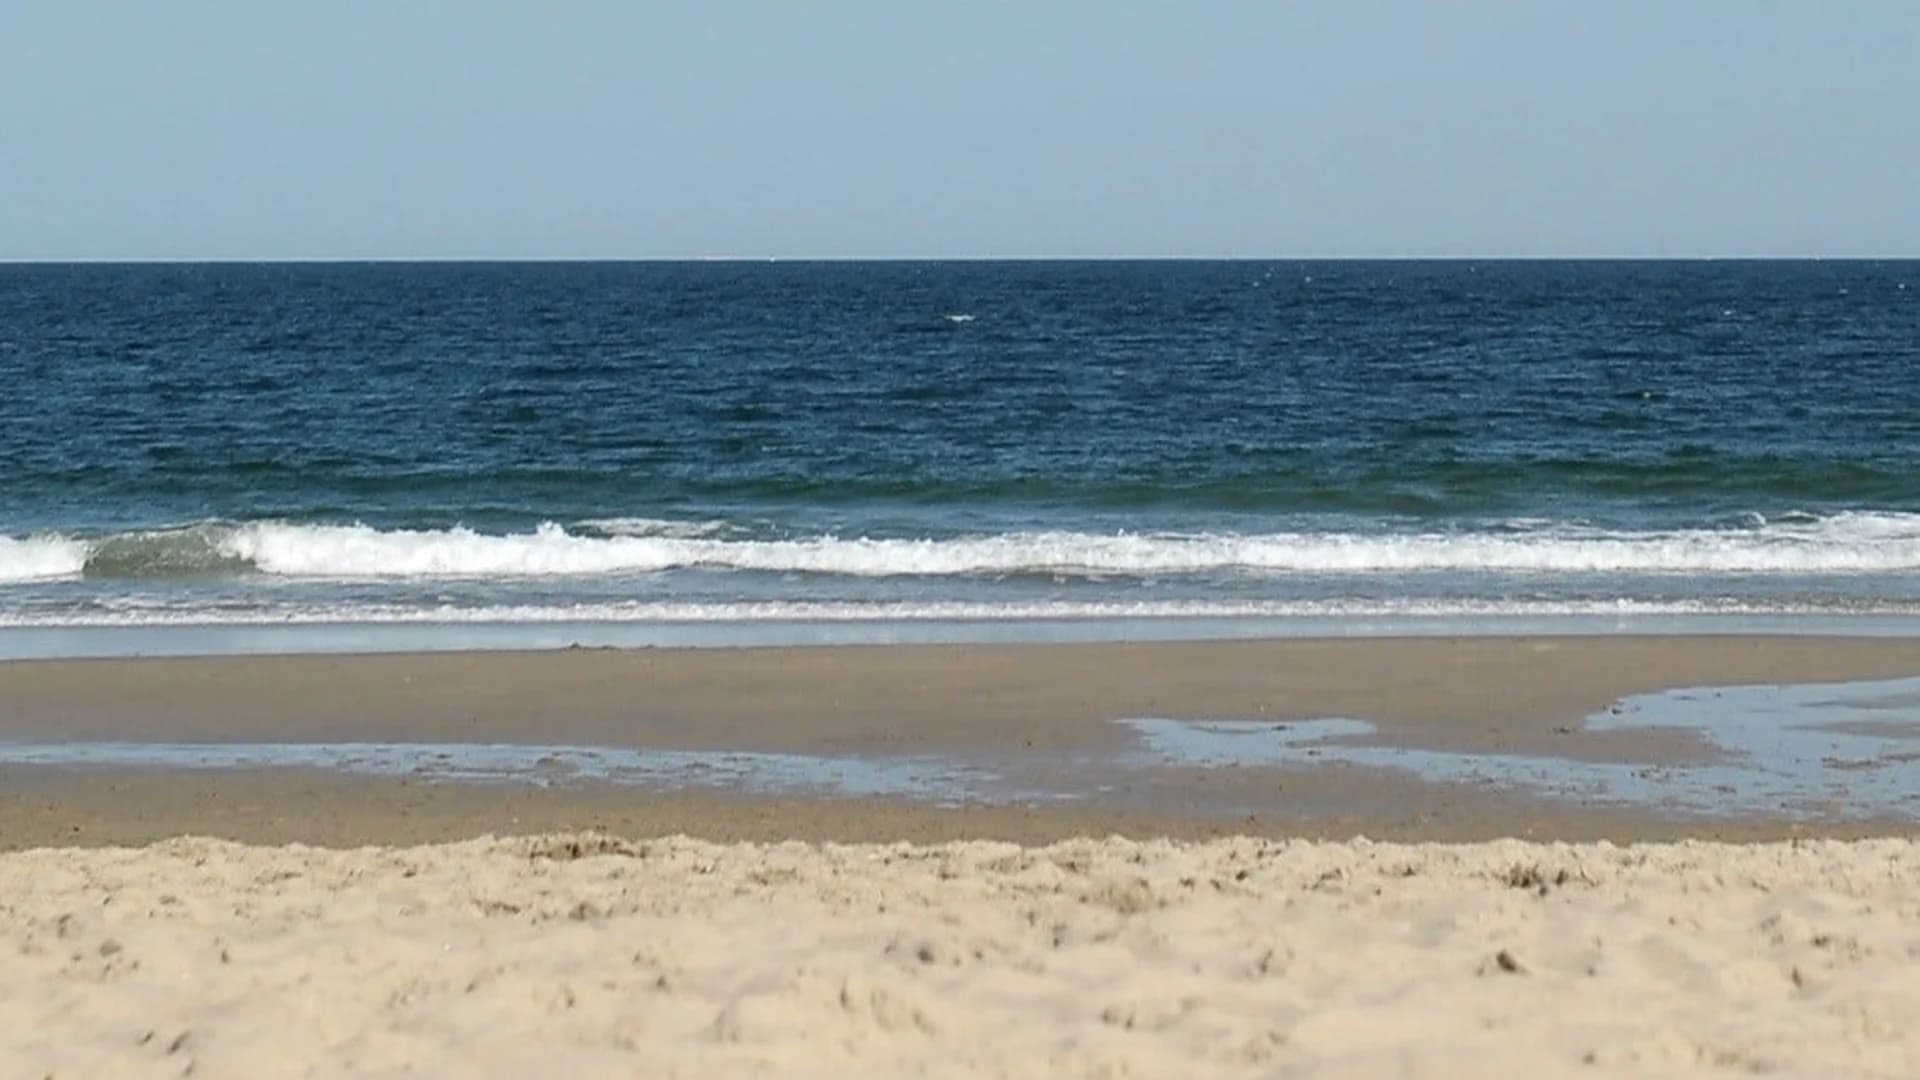 Police: Man drowns while swimming in rough surf off New Jersey coast